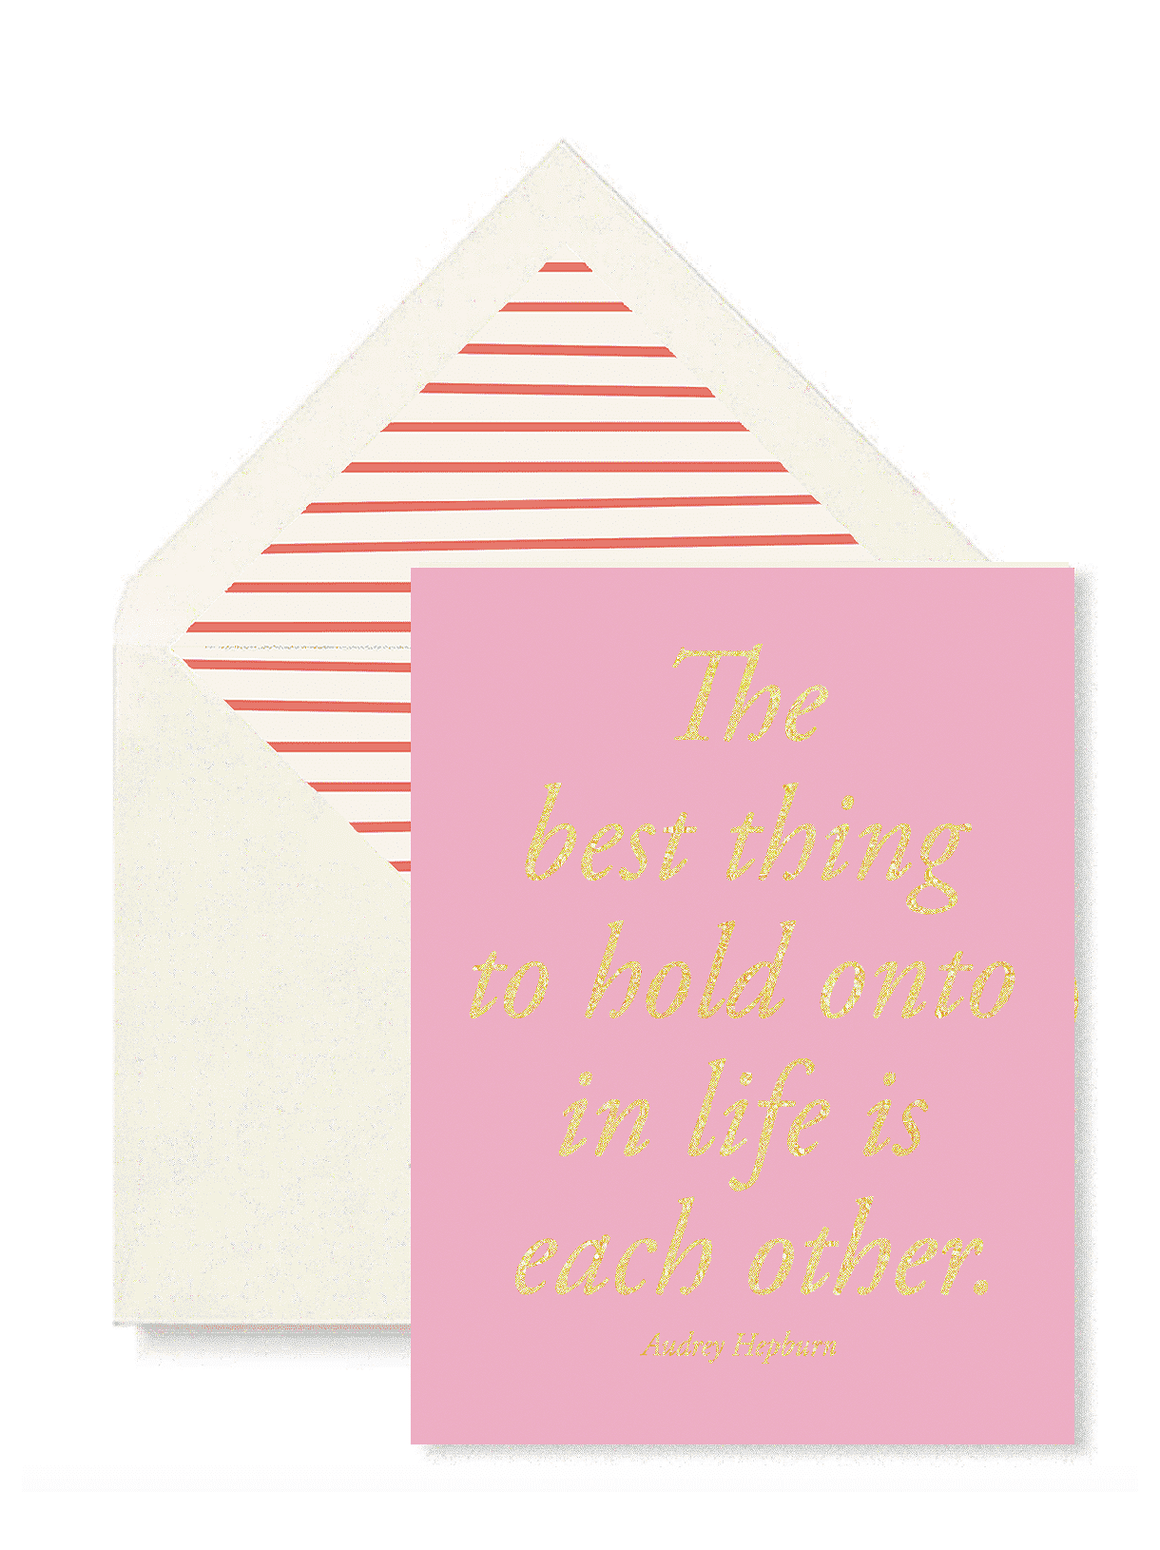 The Best Thing To Hold Pink Greeting Card, Single Folded Card or Boxed Set of 8 - Bensgarden.com